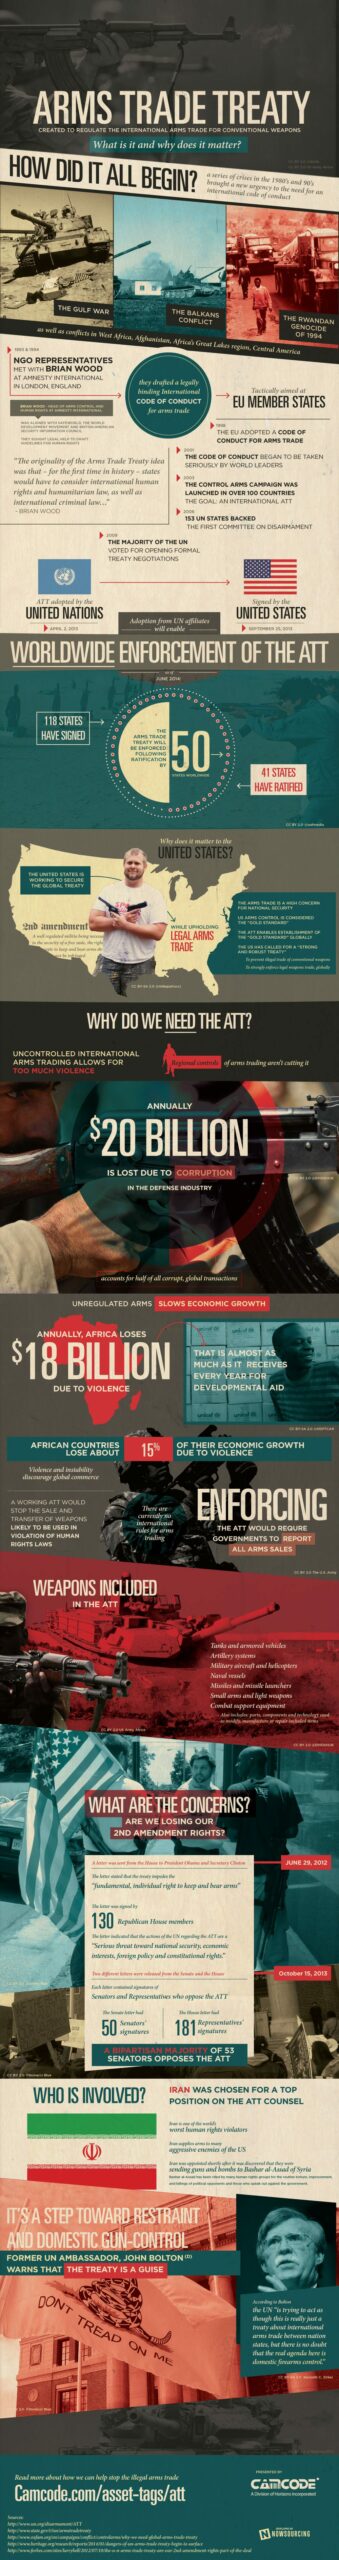 Learn about the united nations arms trade treaty and why it matters